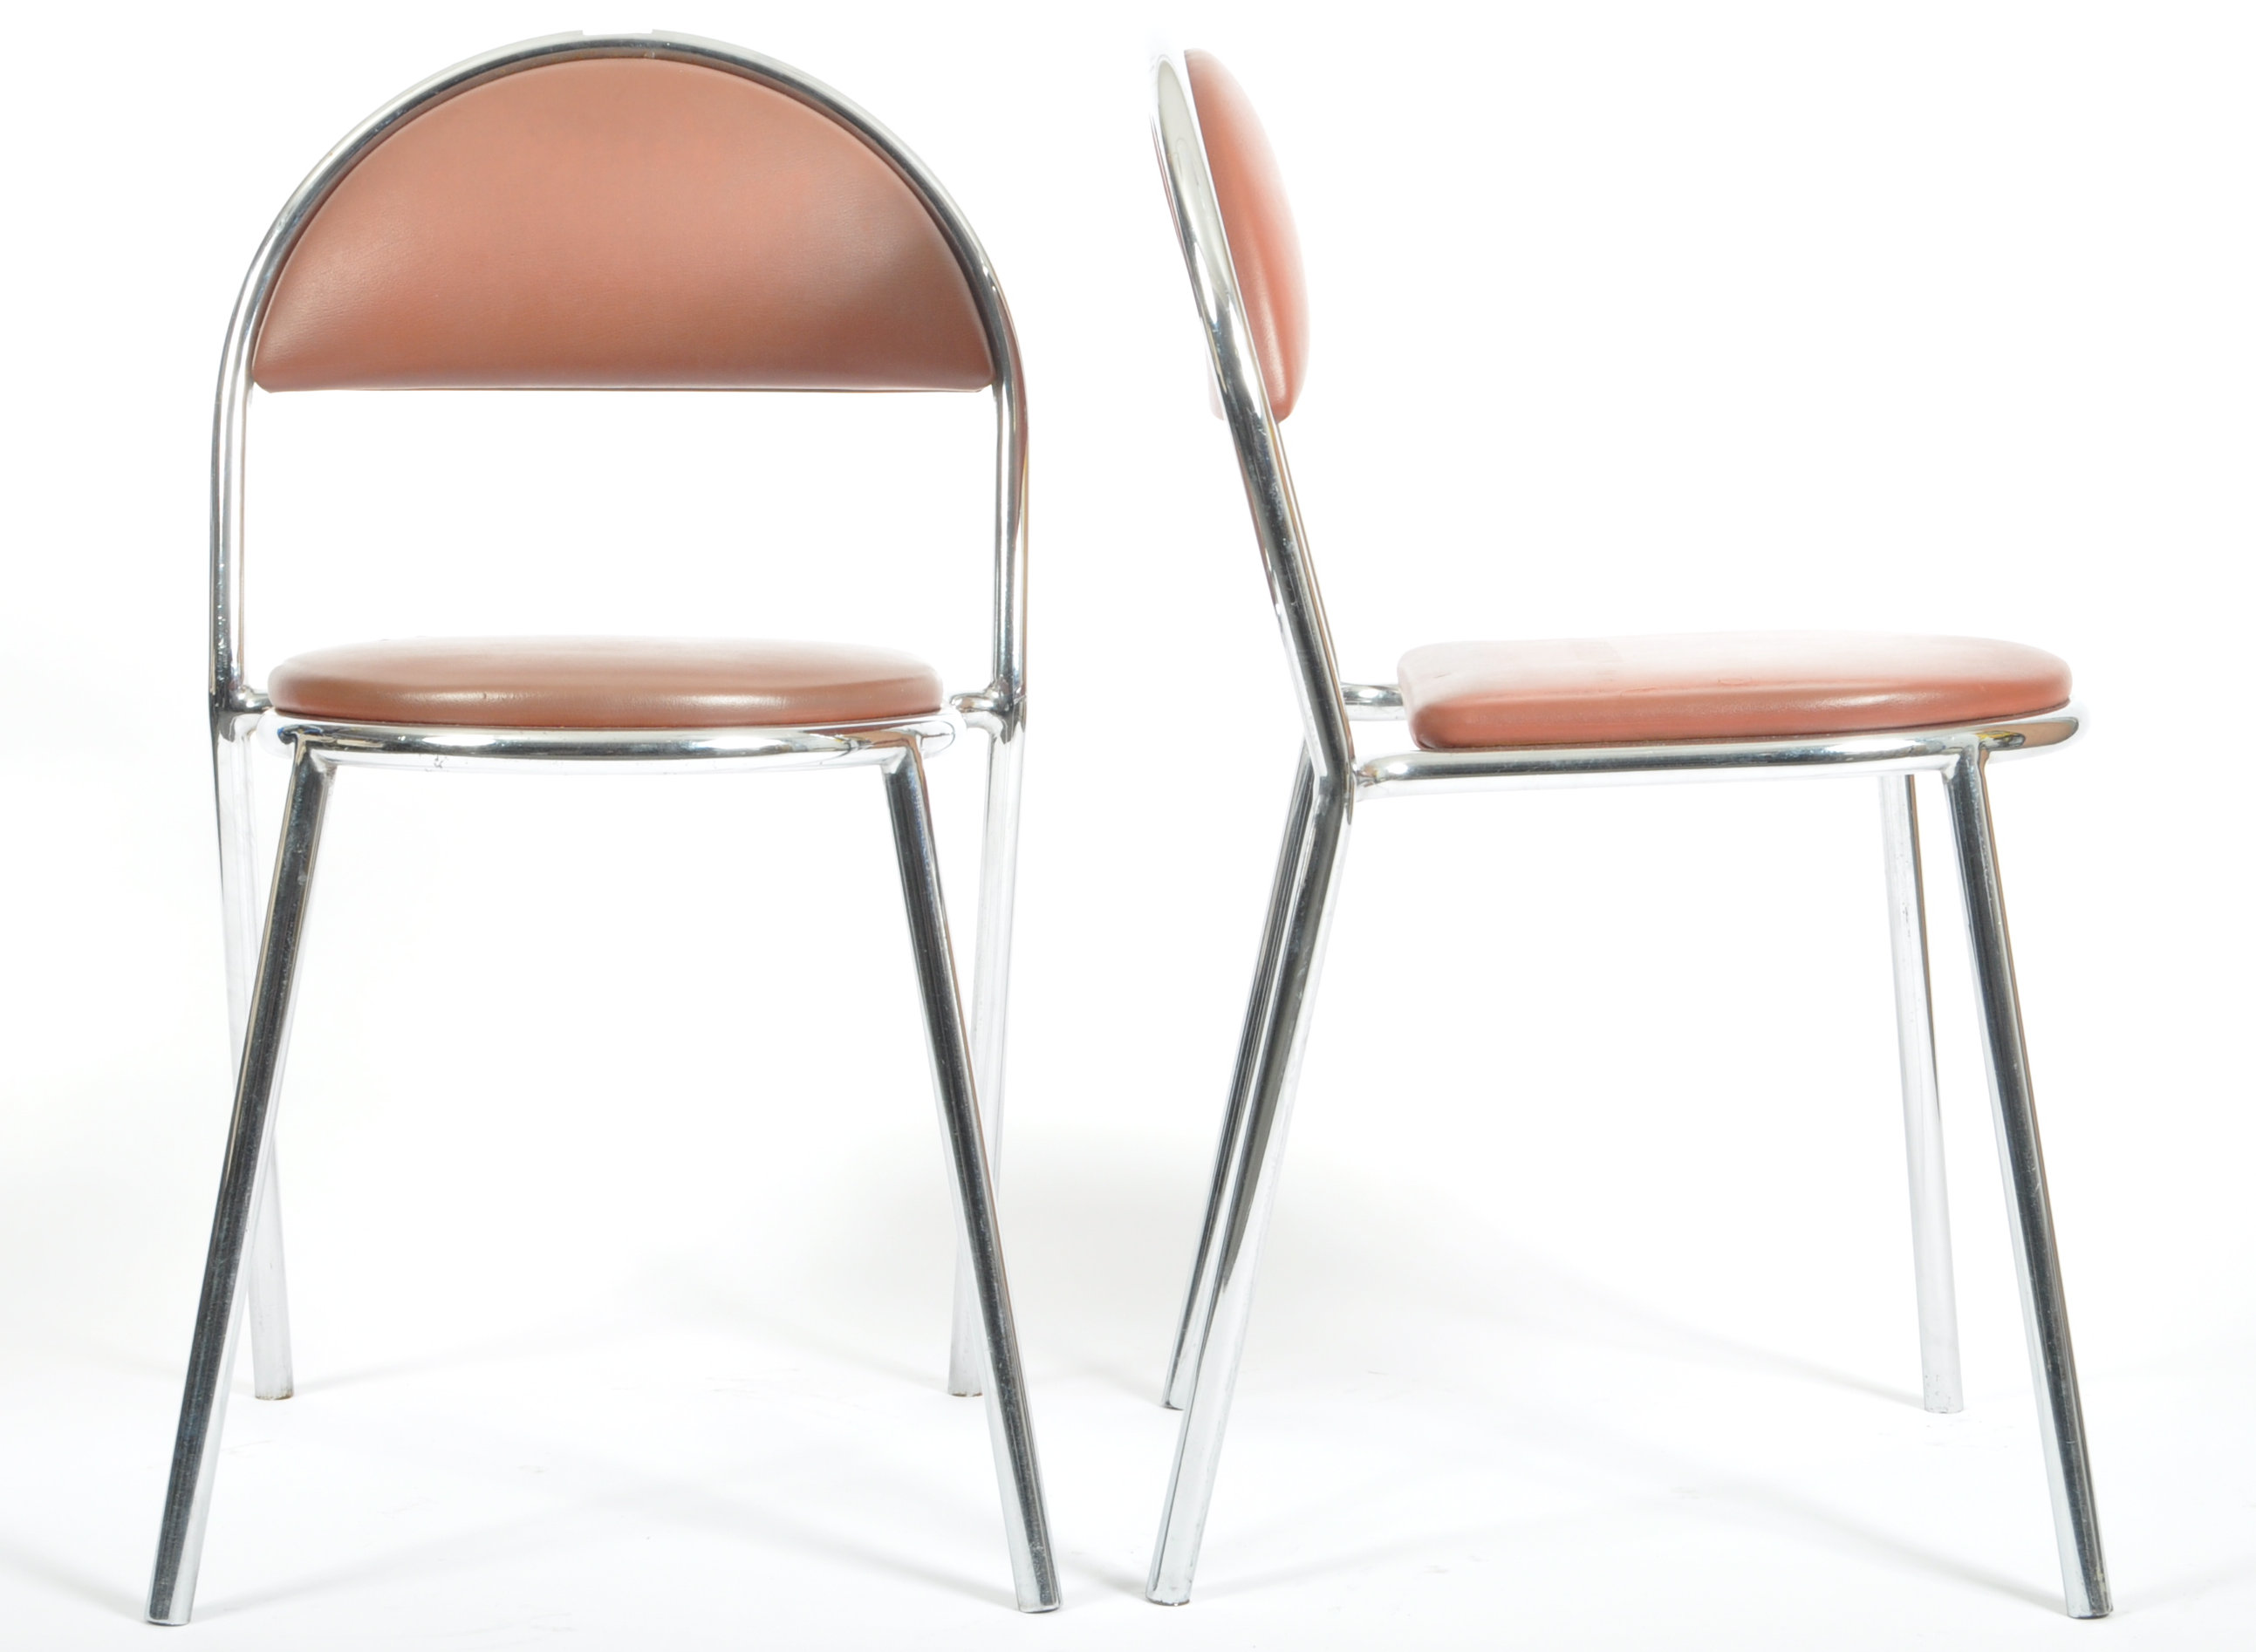 ZOEFTIG - MATCHING PAIR OF VINTAGE CHROME AIRPORT CHAIRS - Image 2 of 4